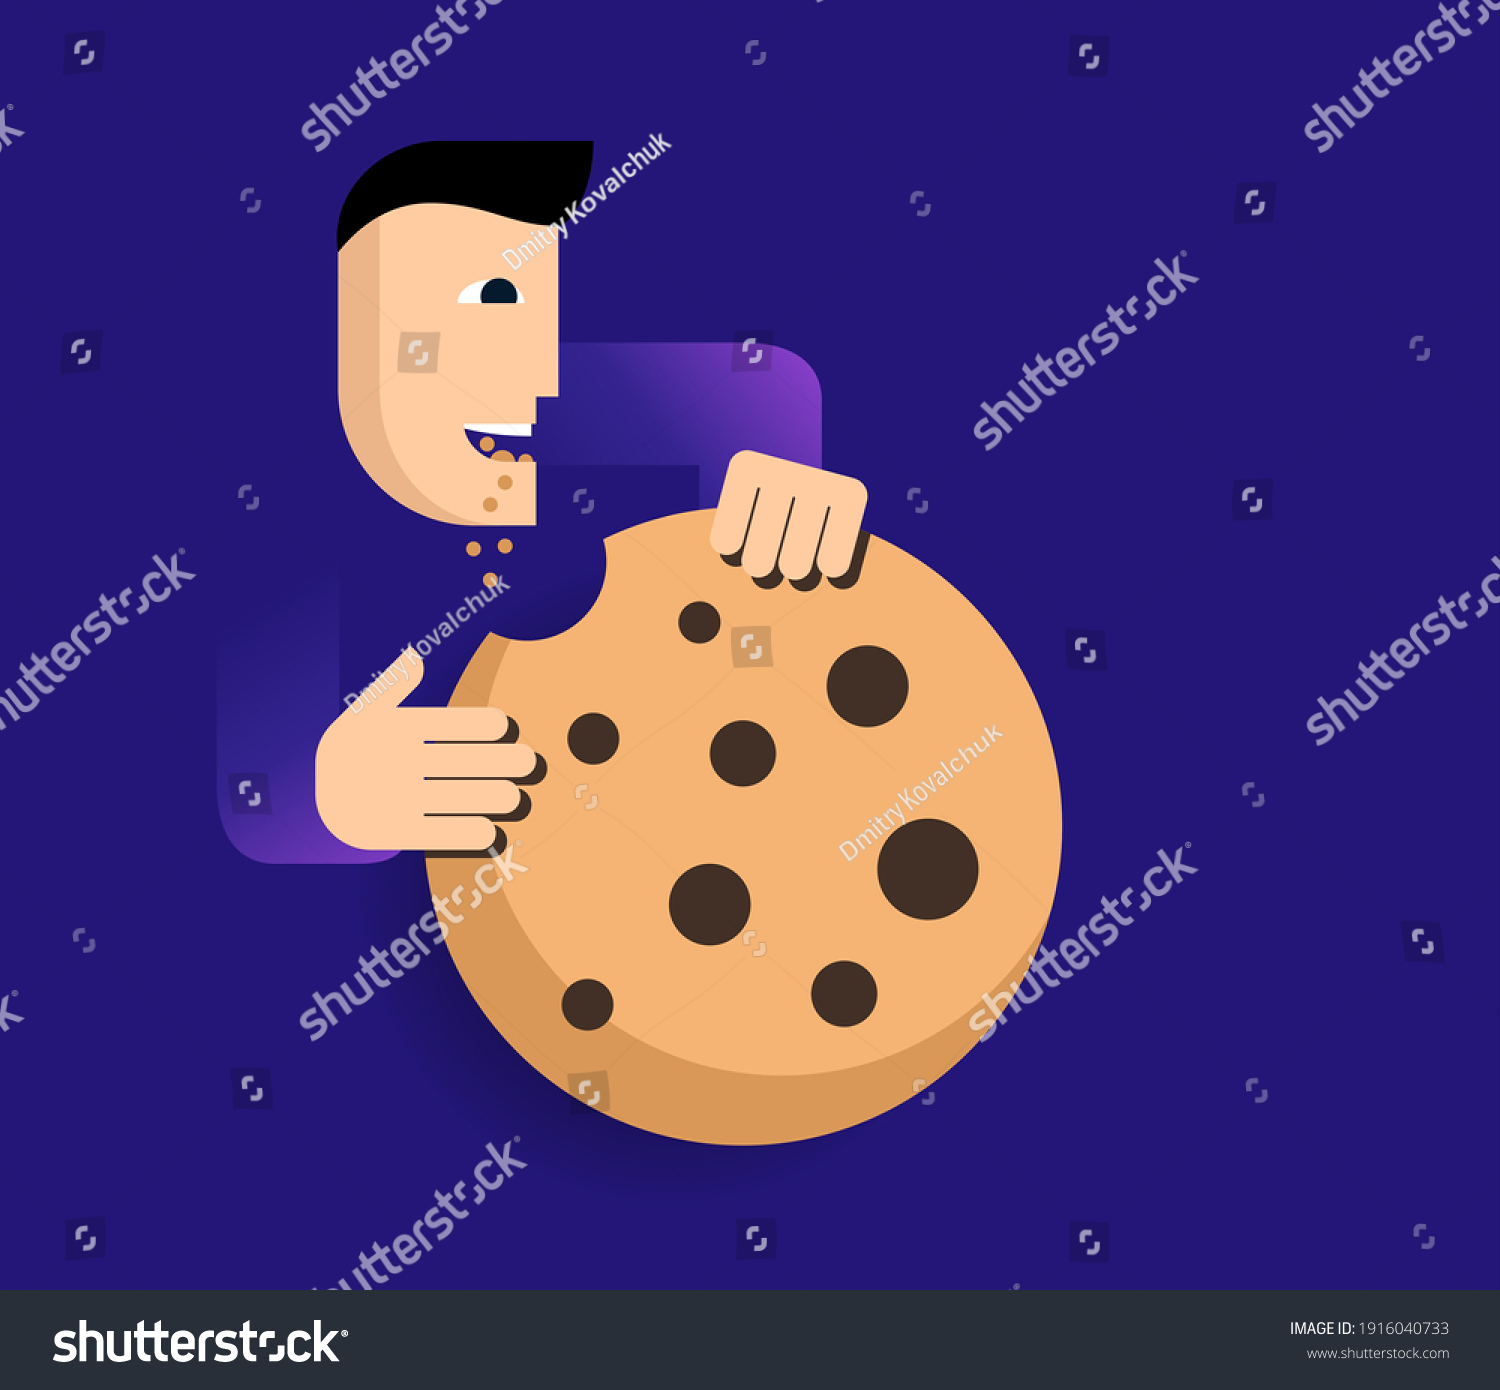 SVG of Accept cookies vector icon on blue background. Abstract character eating big cookie. Vector illustration svg